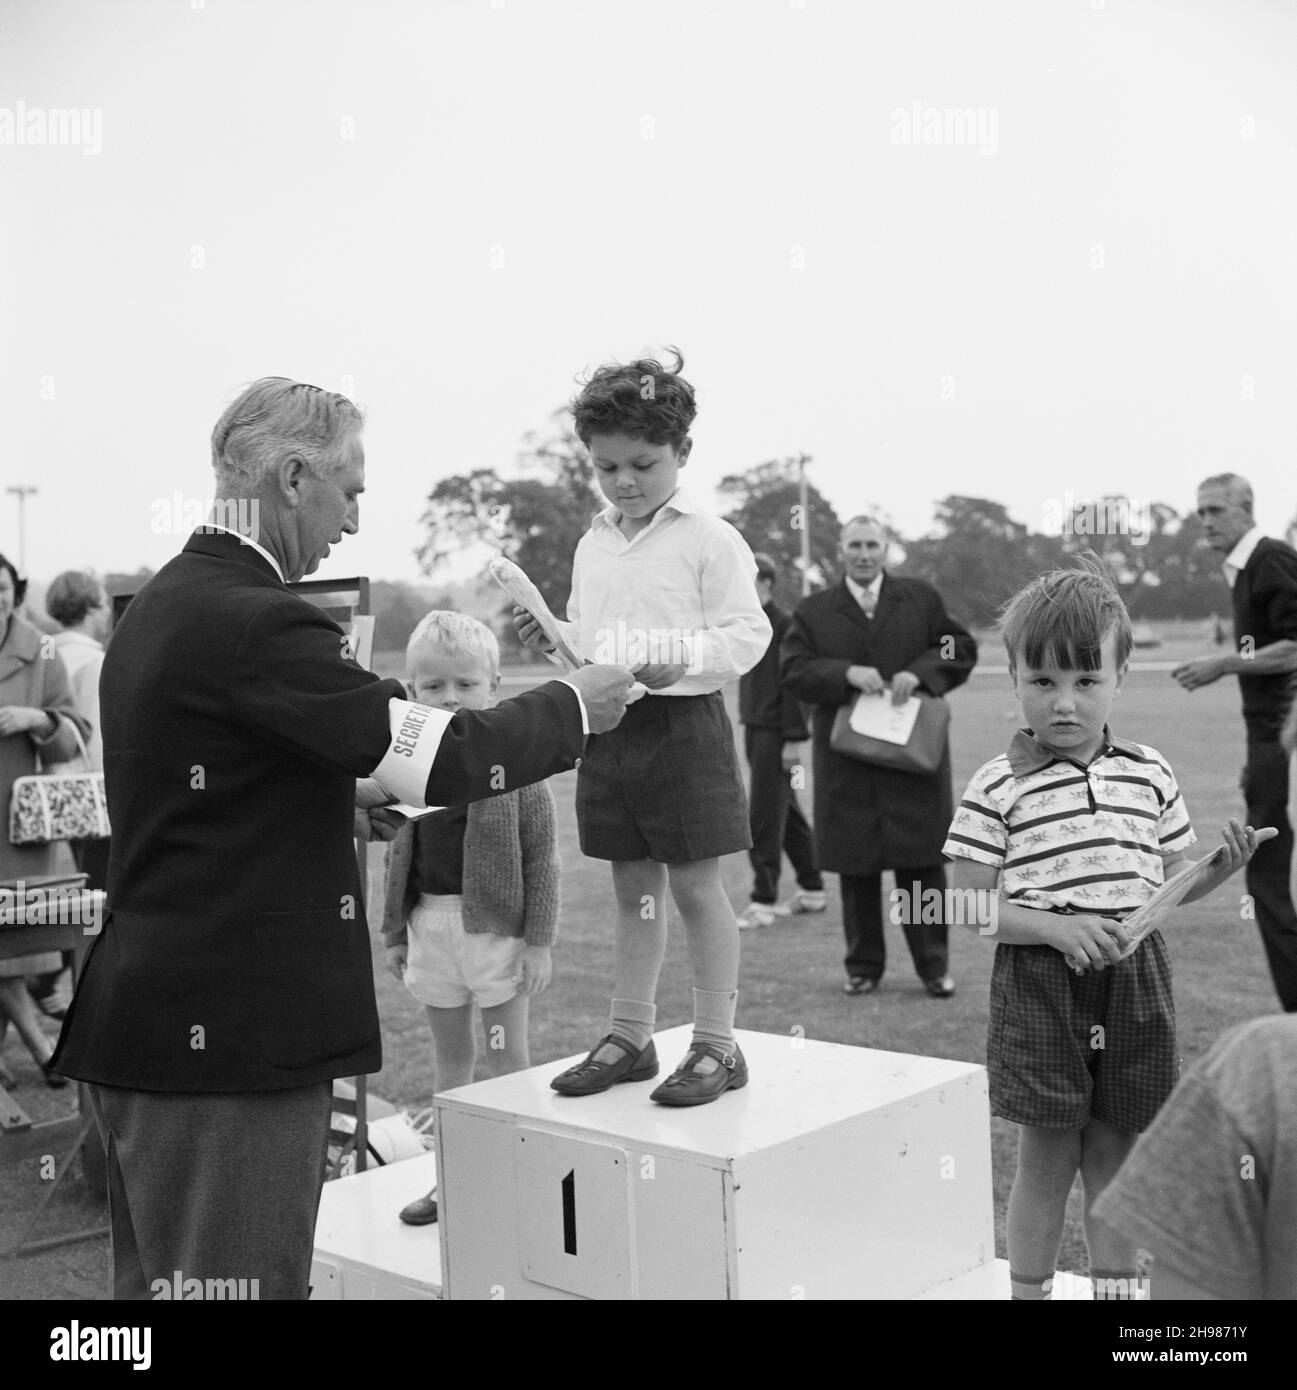 Copthall Stadium, Hendon, Barnet, London, 25/06/1966. A young boy on a podium being presented with a prize, at the annual Laing Sports Day held at Copthall Stadium. In 1966, the annual Laing employees' Sports Day was held on 25th June at Copthall Stadium in Hendon. It was the first time the event had been held there, having previously taken place the Laing Sports Ground at Elstree. A range of events included athletics and a football competition, and competitors travelled from the firm's regional offices and sites, including from Scotland and Carlisle. There was also a funfair, marching band, a Stock Photo